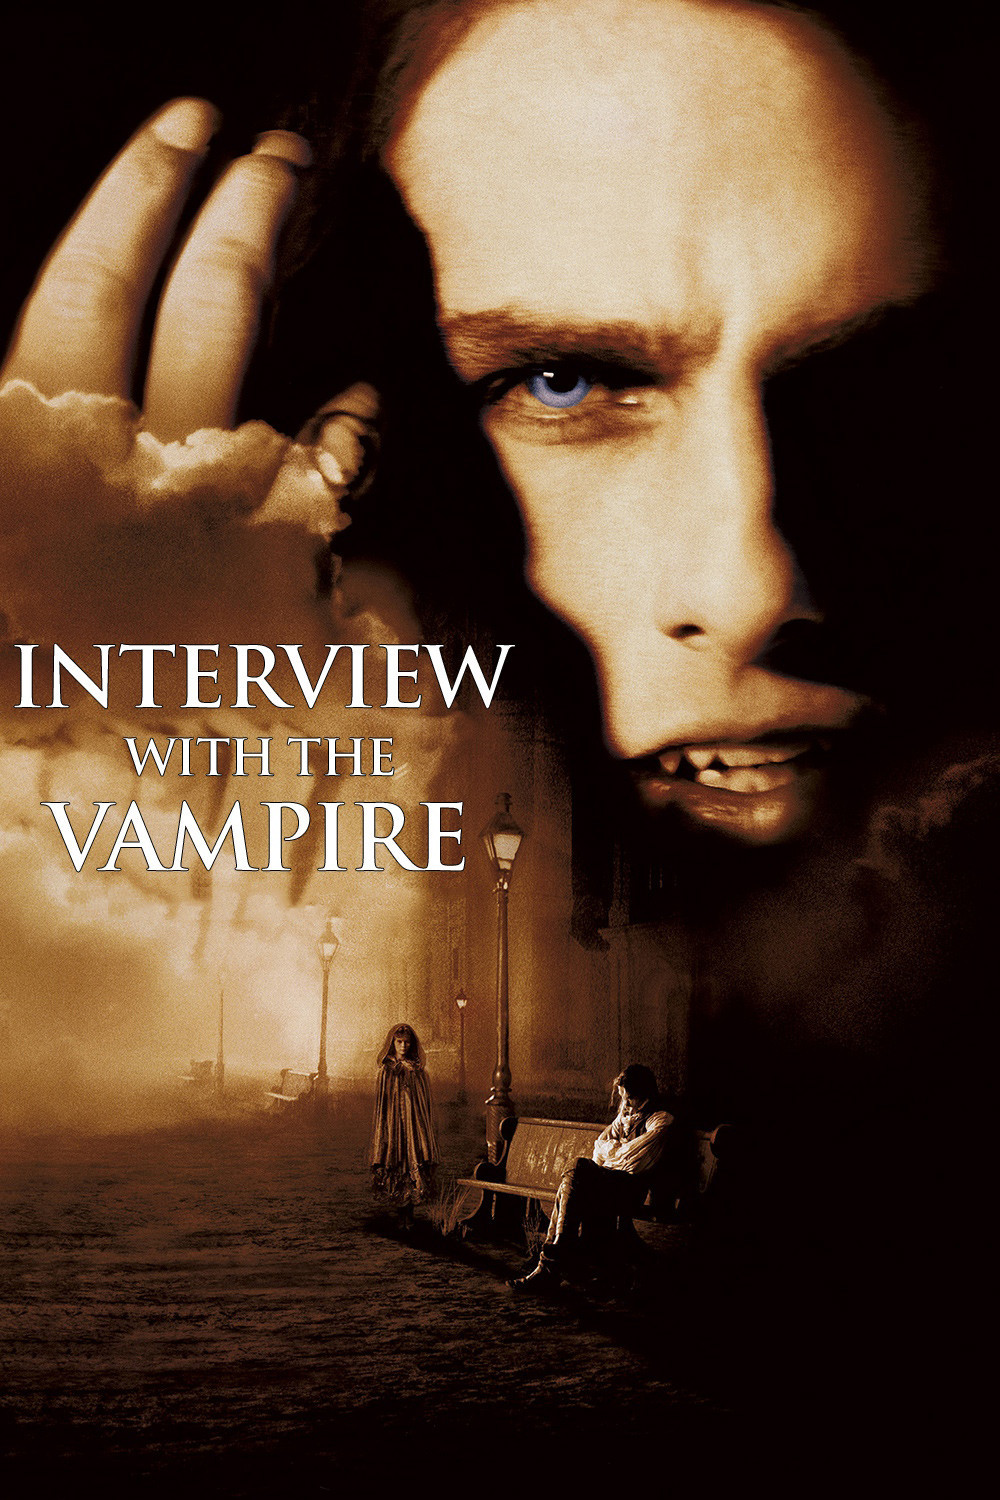 interview with a vampire movie